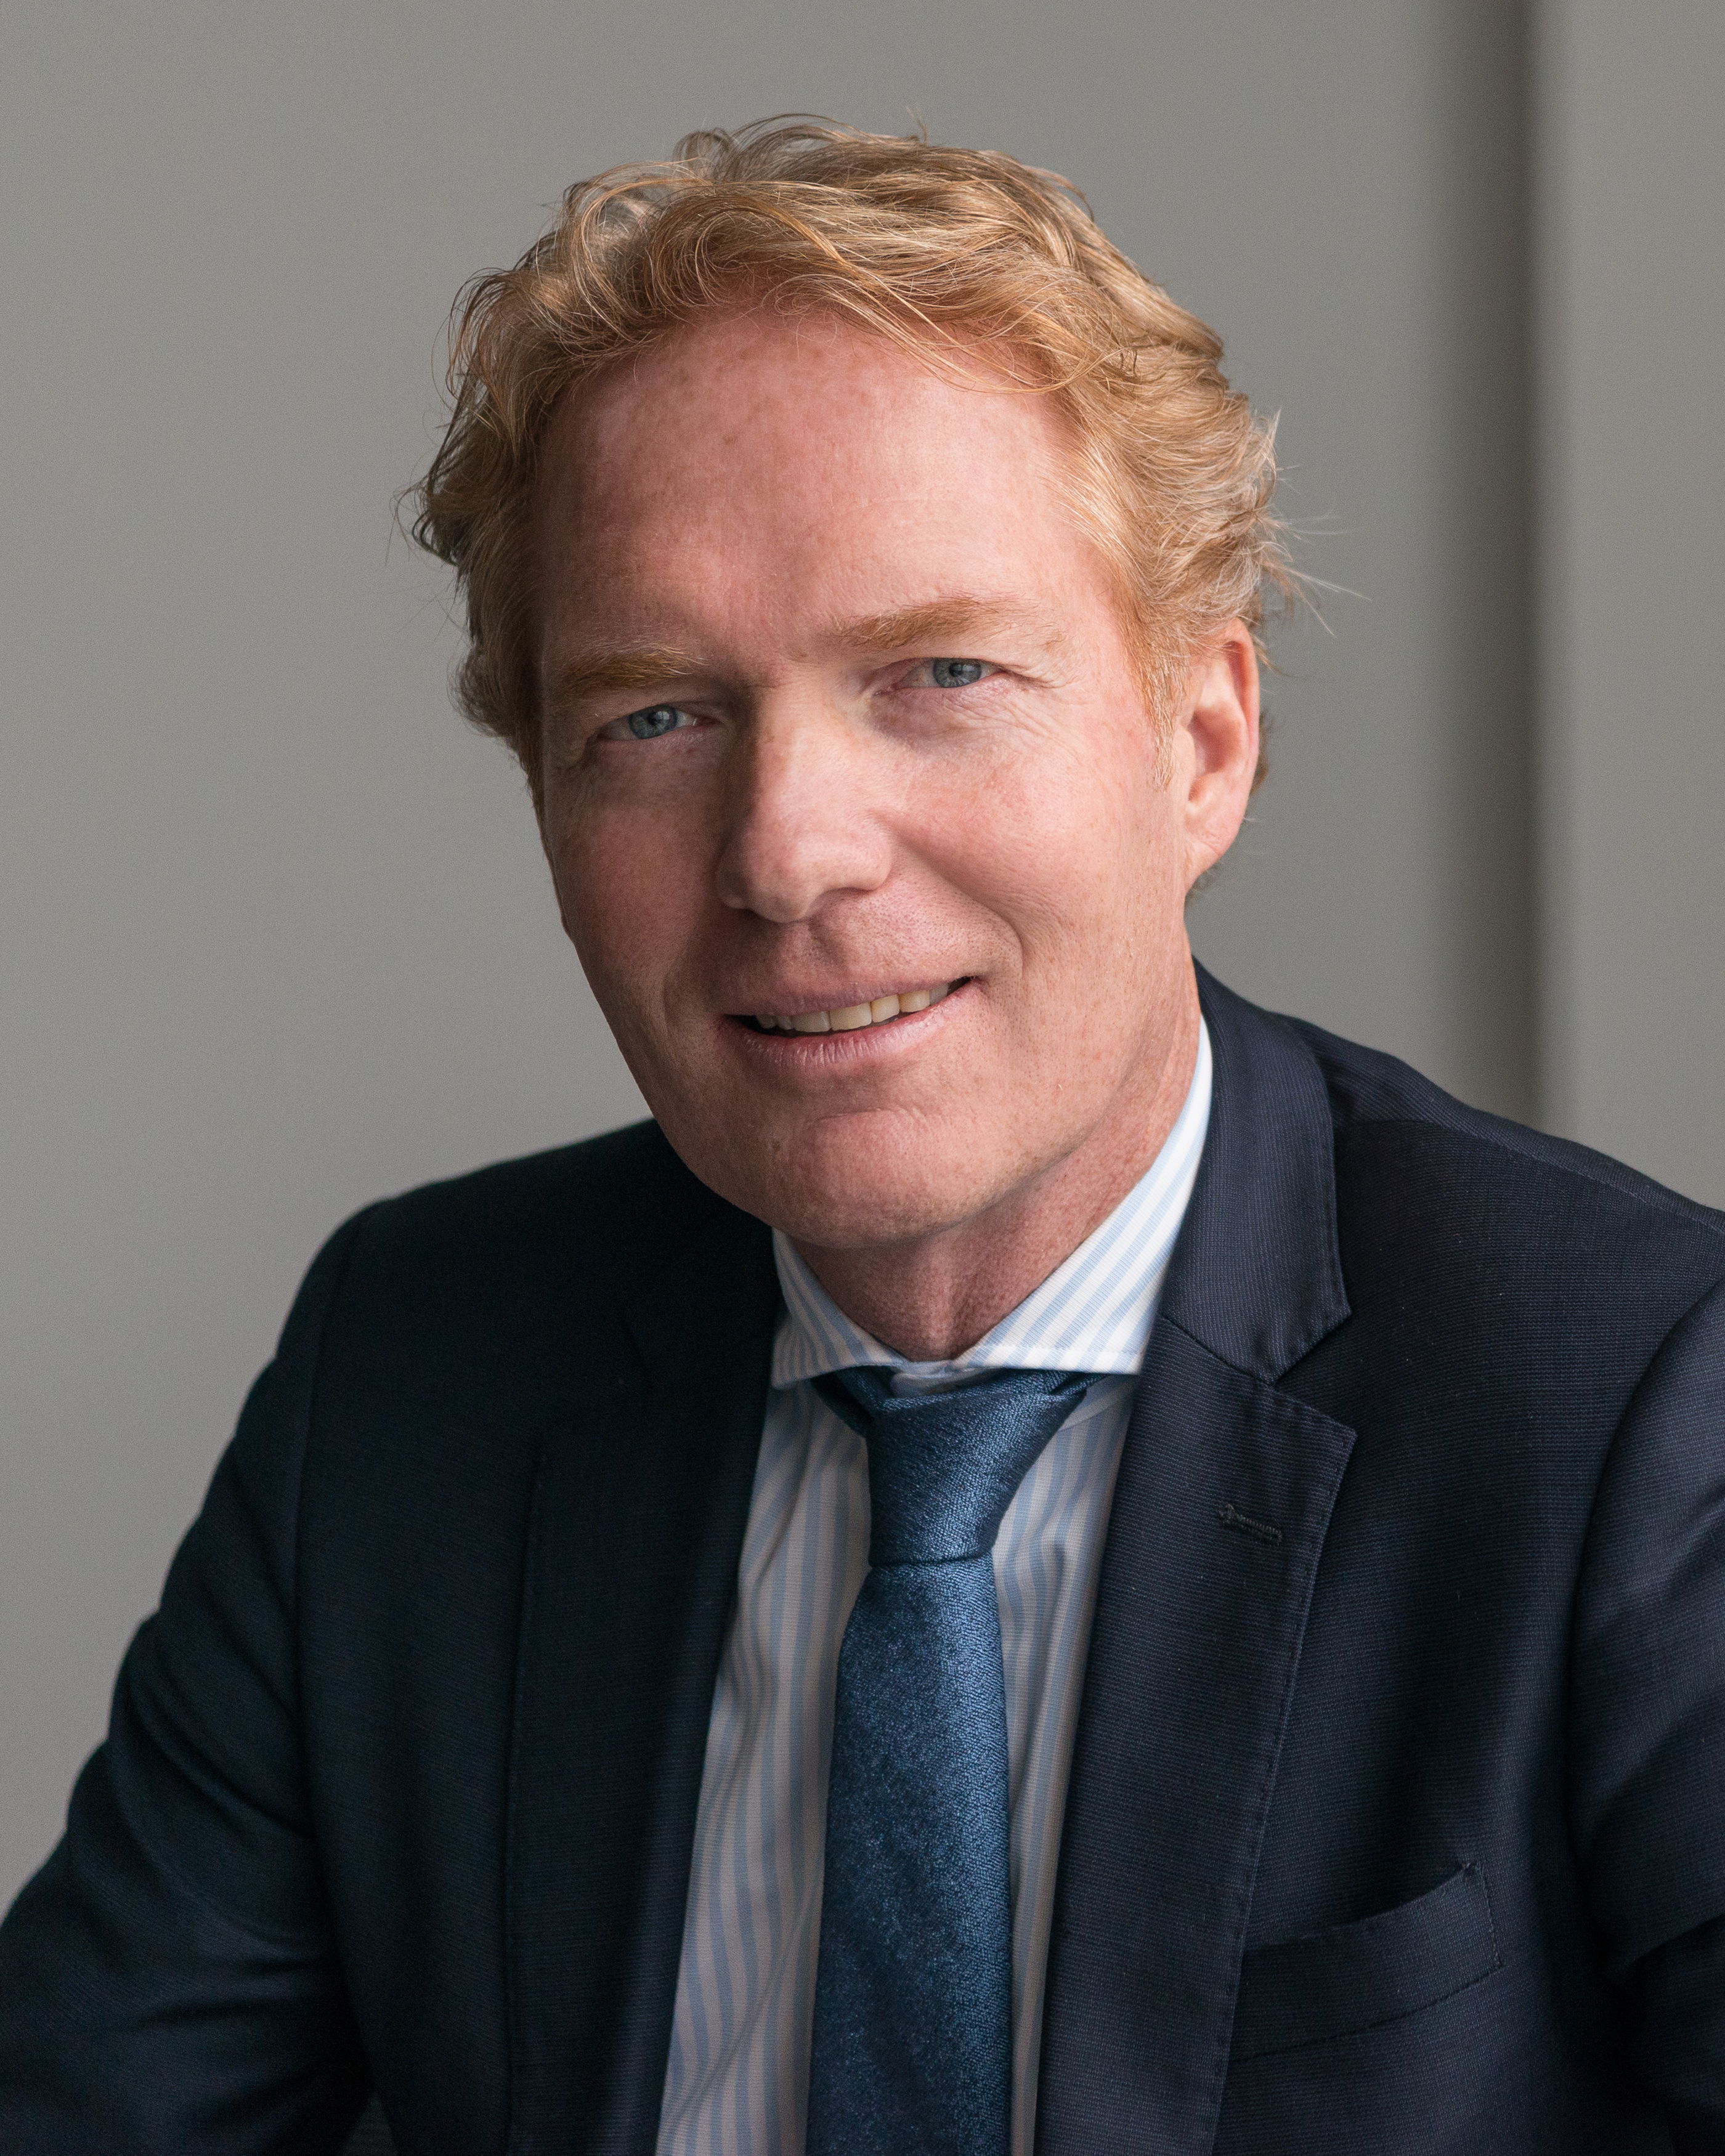 Maurits Binnendijk has been named Vice President and General Manager, DRiV EMEA Commercial Organization